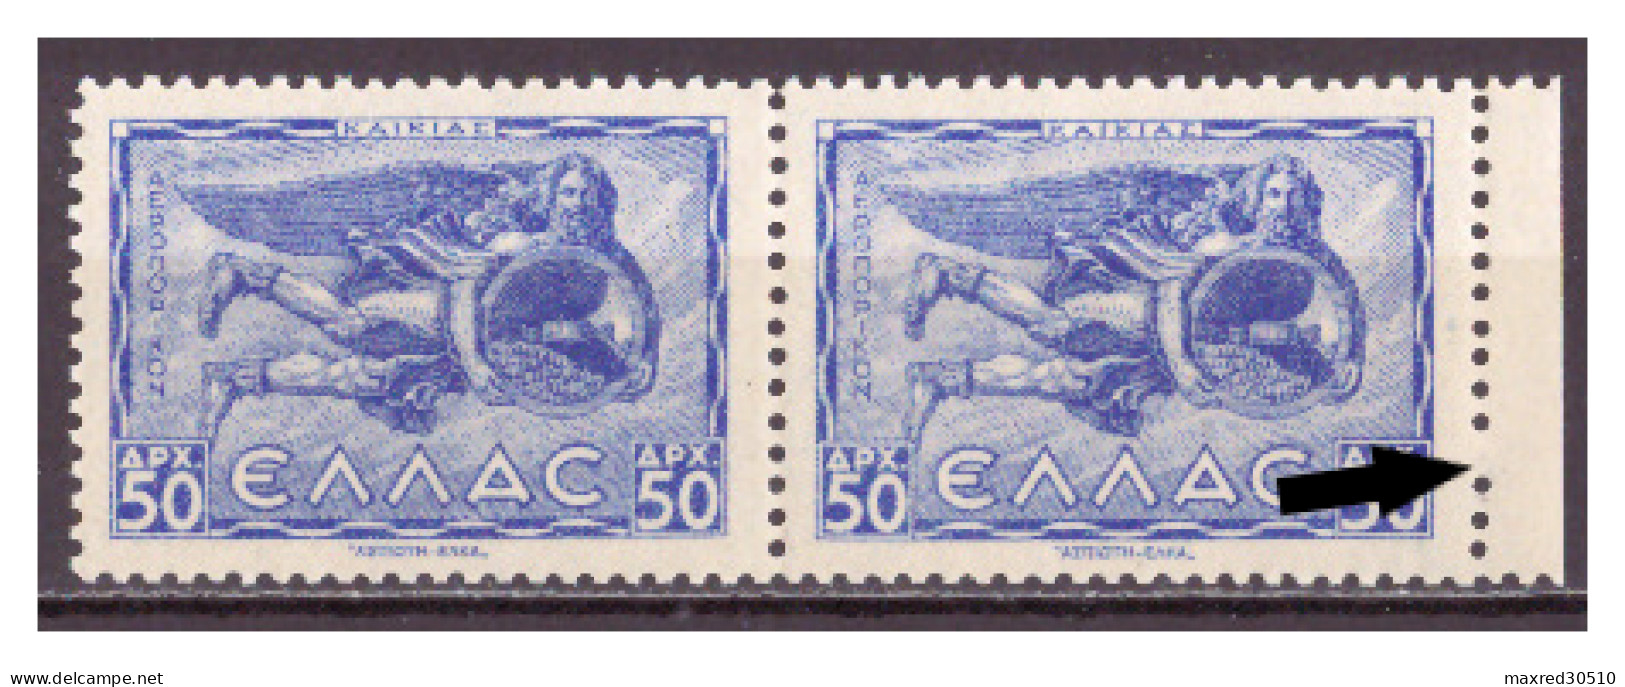 GREECE 1943 AIRPOST ISSUE HORIZONTAL PAIR 50DR. OF "WINDS II" WITH PRINTING ERROR AT THE RIGHT PERFORATION SEE DESCRIBE - Plaatfouten En Curiosa